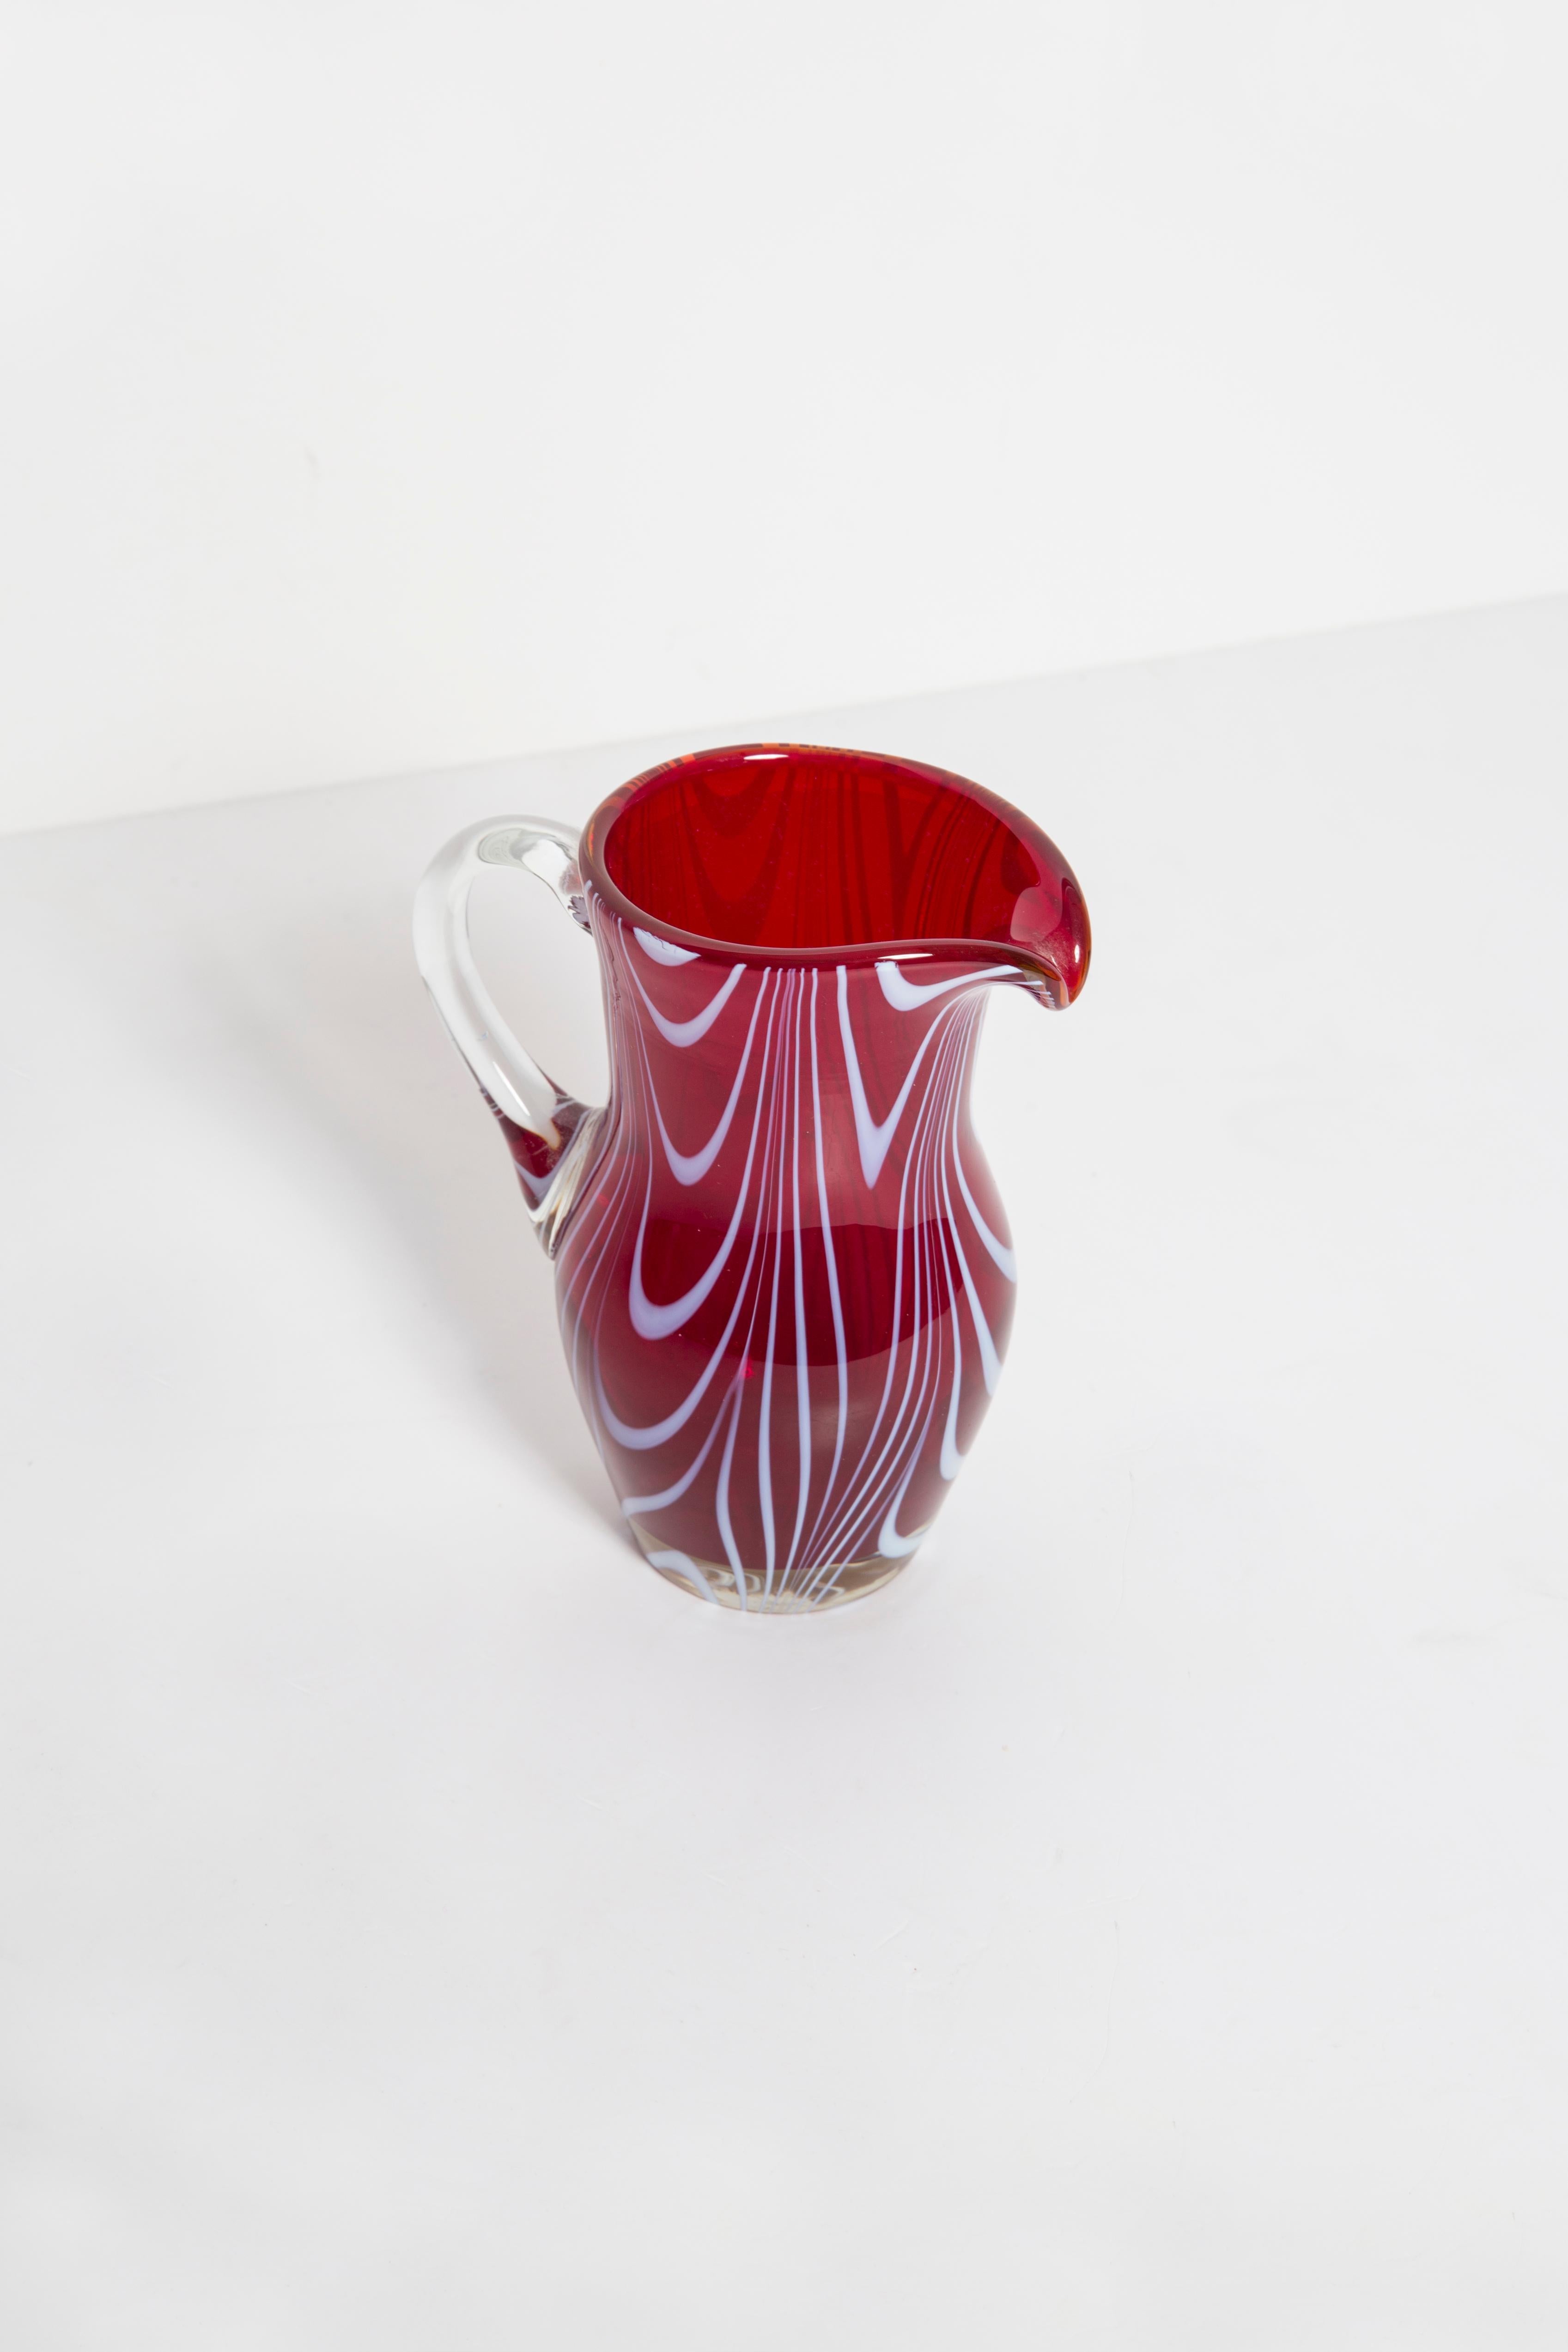 Mid Century Vintage Dark Red Small Vase, Europe, 1960s For Sale 2